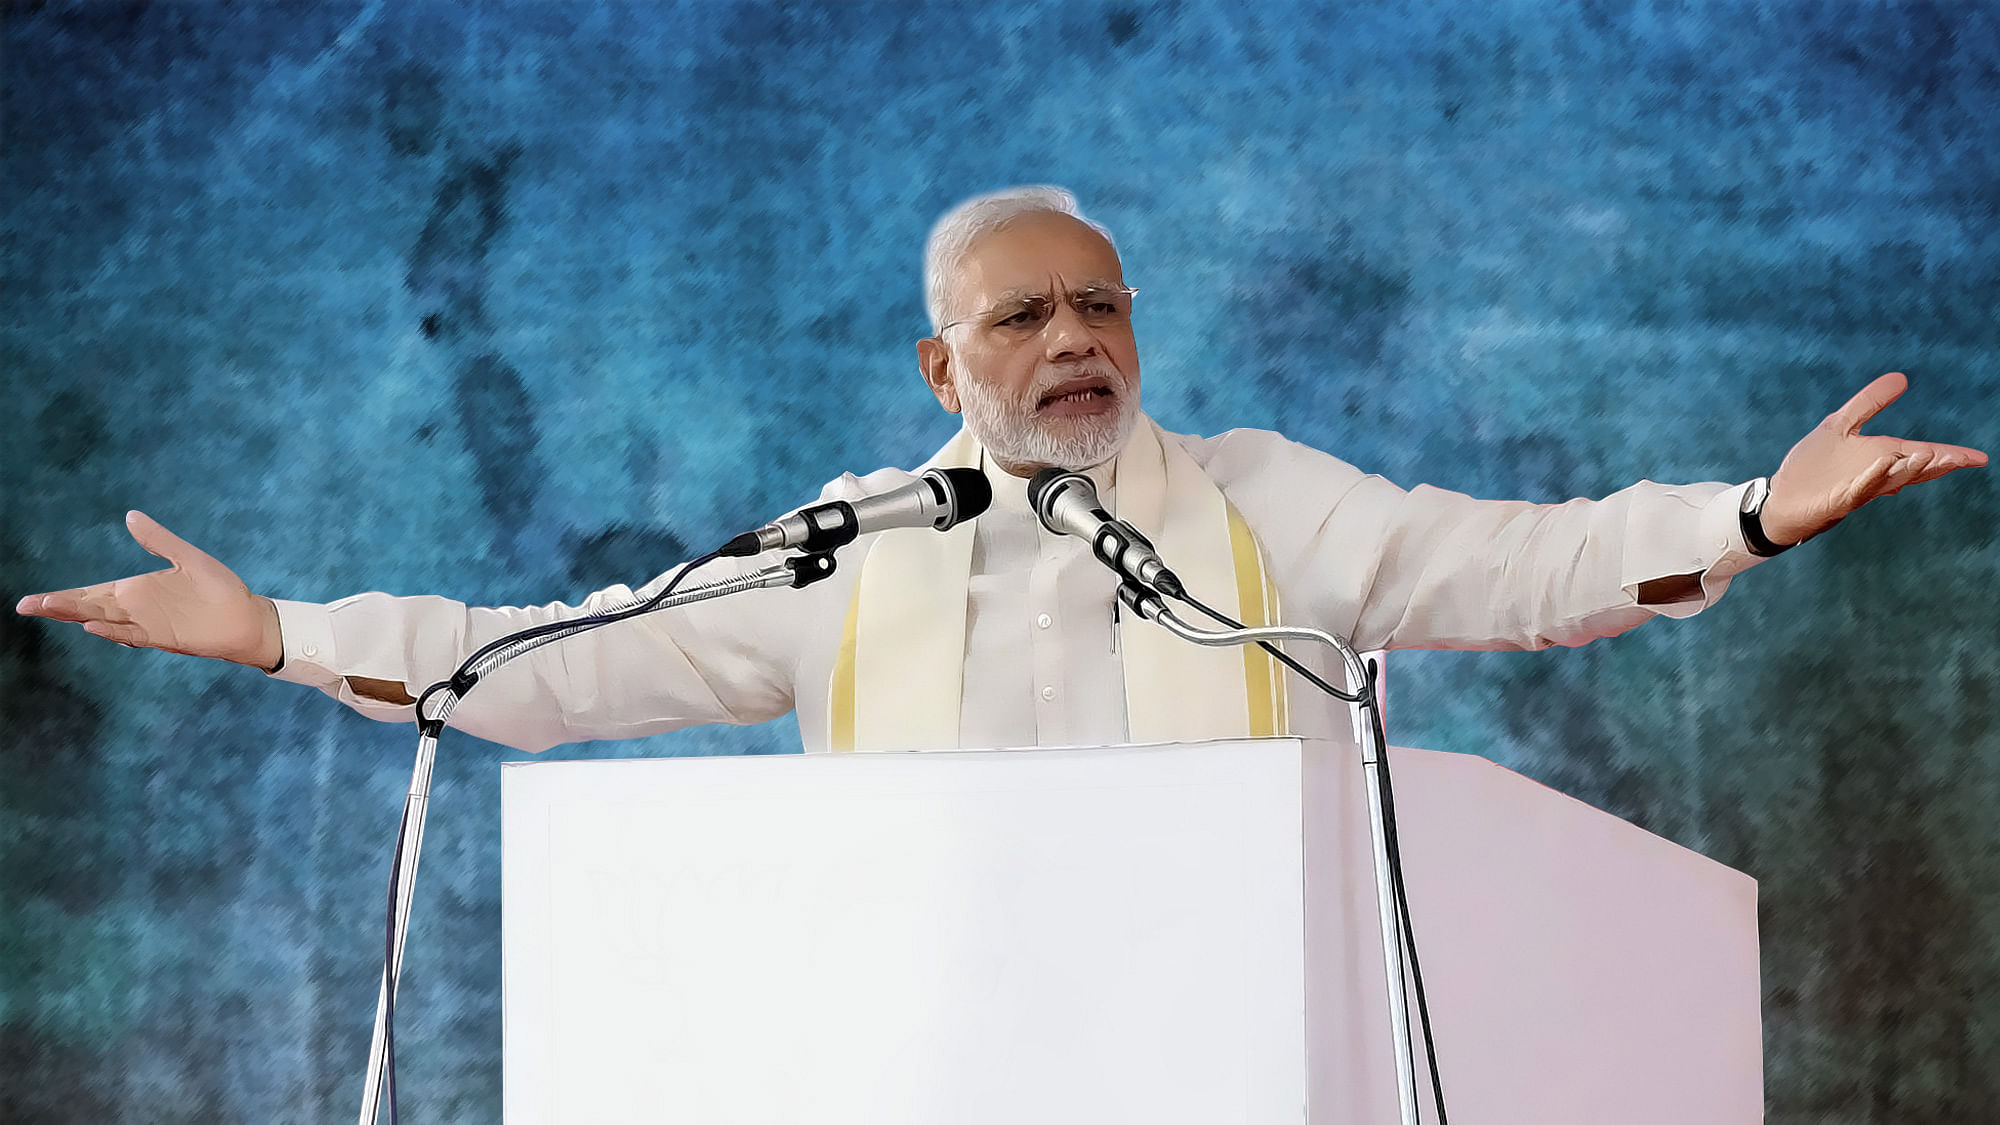 Prime Minister Narendra Modi addressing a public rally at the BJP National council meeting at Kozhikode, 24 September, 2016. (Photo: PTI/ Altered by <b>The Quint</b>)